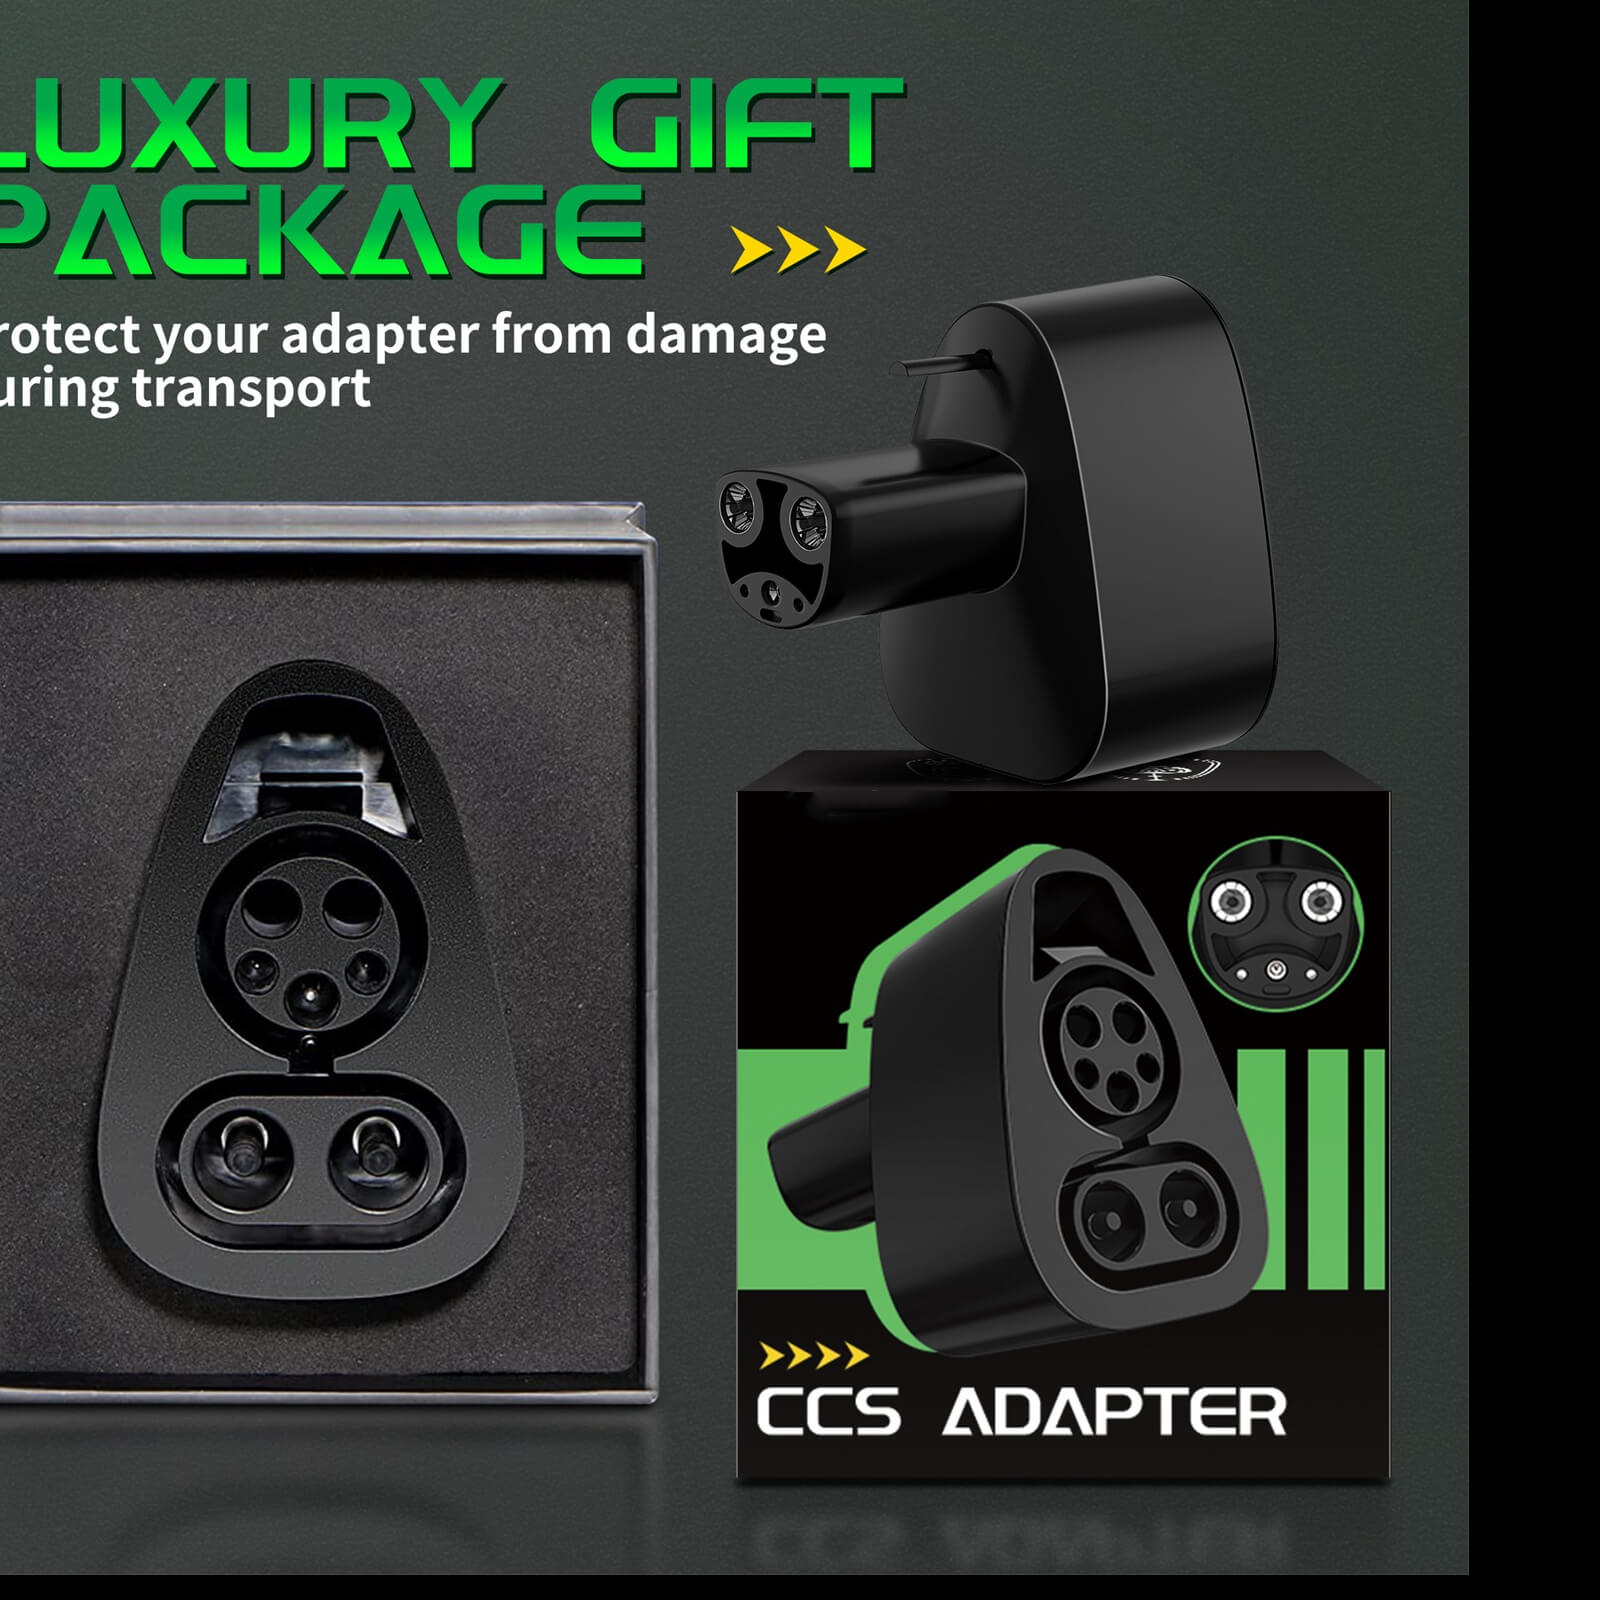 CCS Charger Adapter Compatible with Tesla Model 3,Y, S and X - 250KW DC Fast Charging